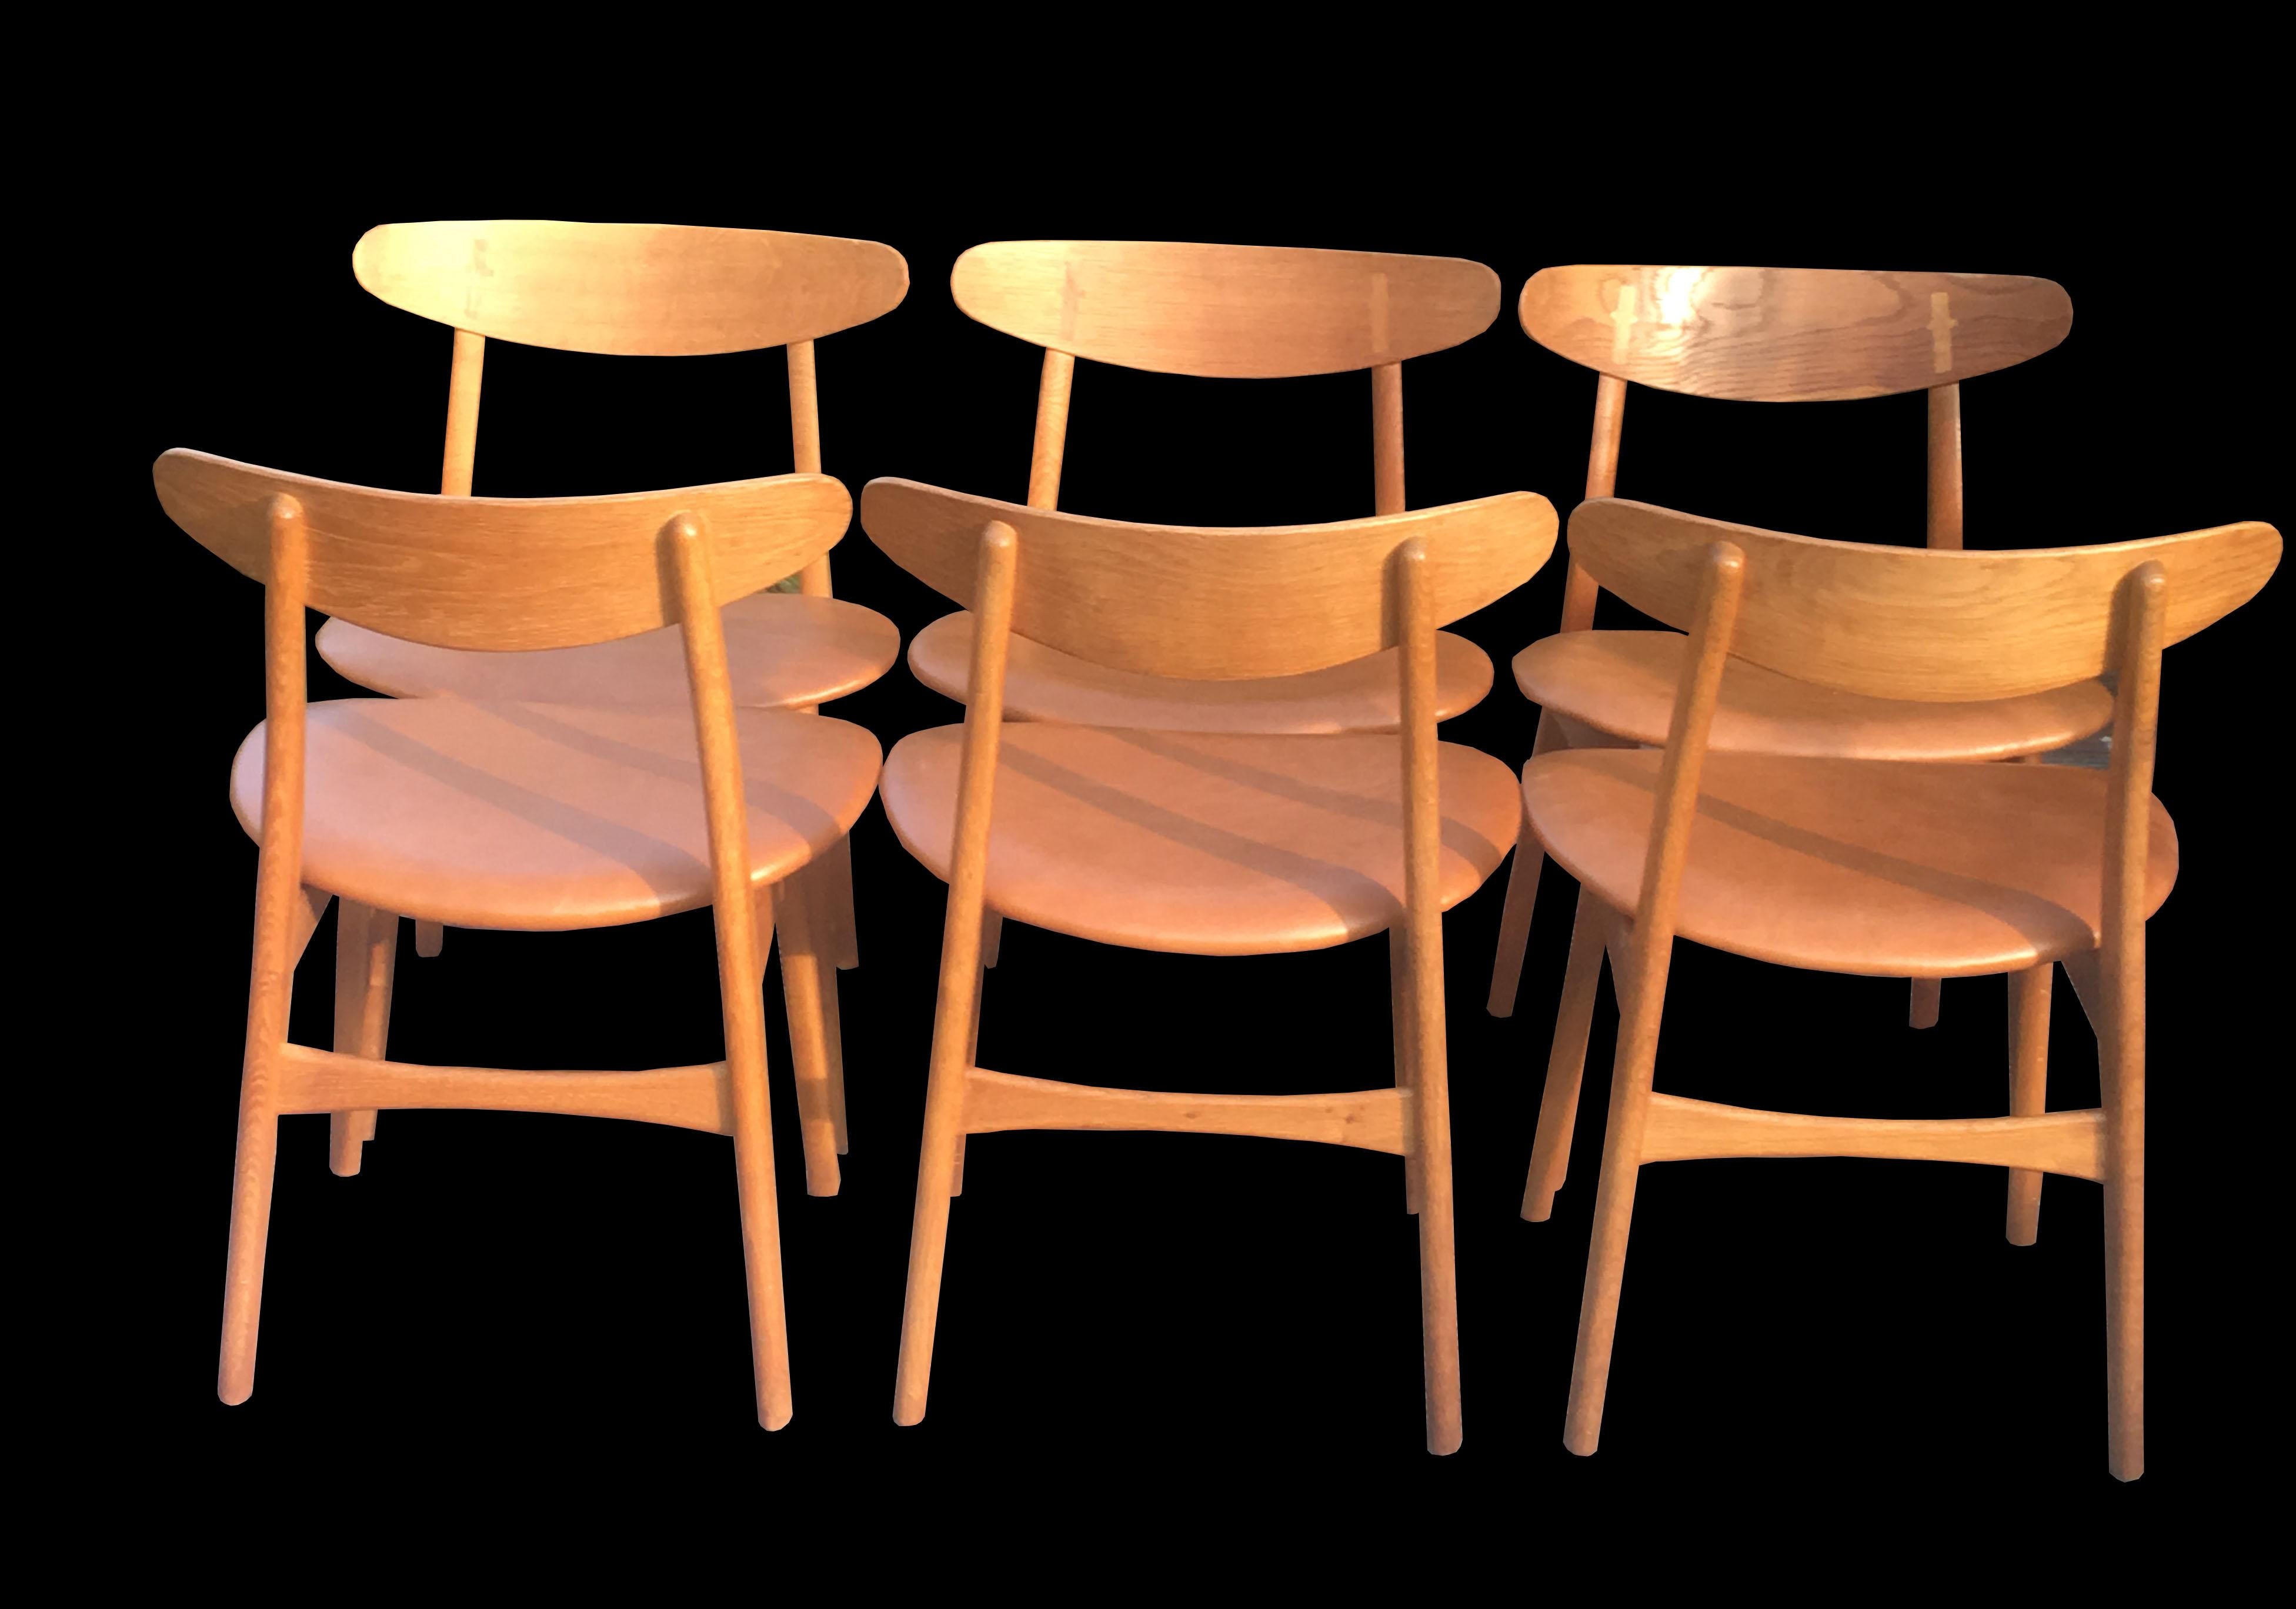 A fine set of six CH30 oak dining chairs with cognac leather seat pads, by Hans J. Wegner, and produced by Carl Hansen & Son, all in very good condition.